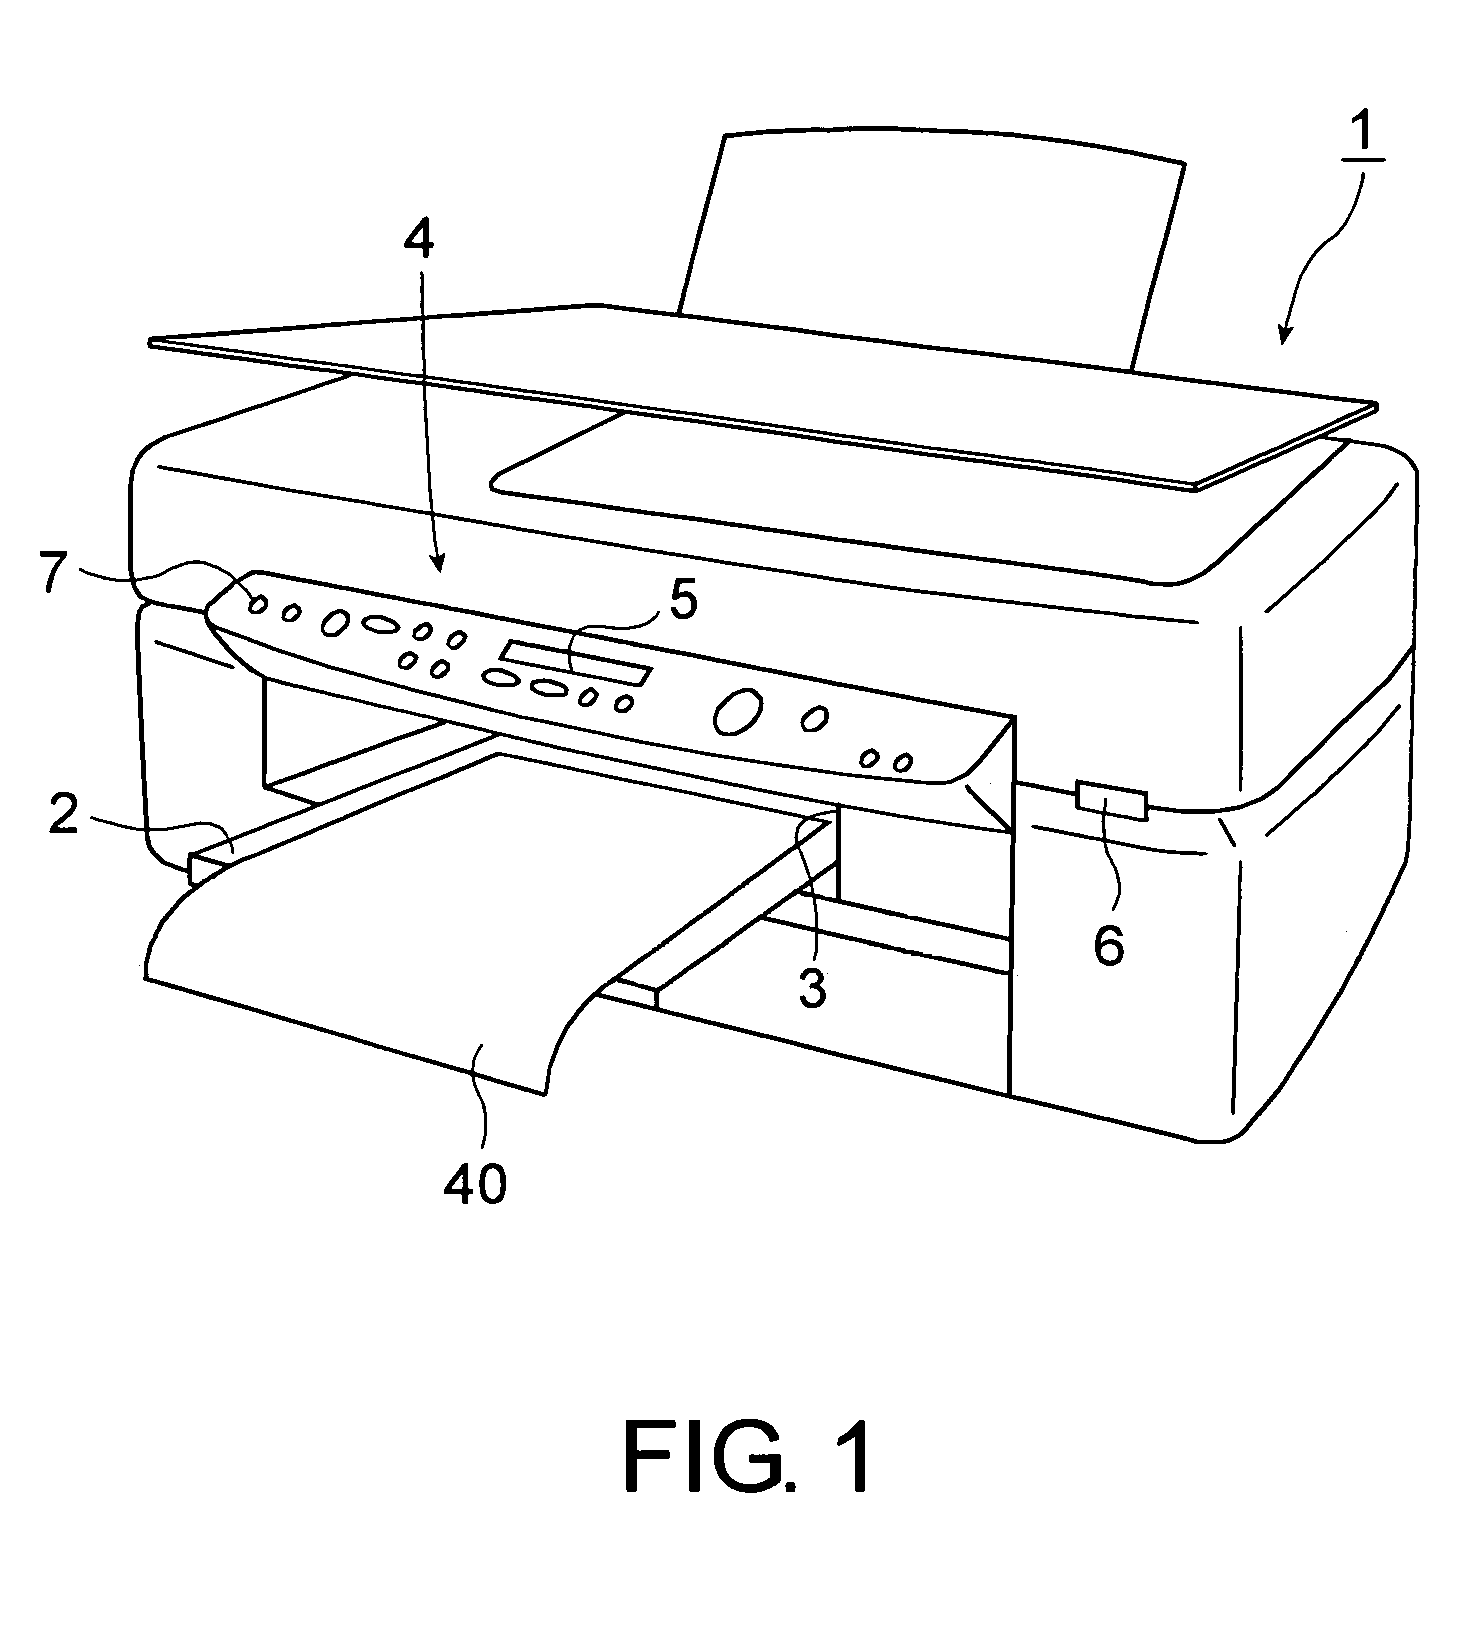 Printing apparatus, recording head cleaning method, control process and computerized cleaning program for the recording head in a printer